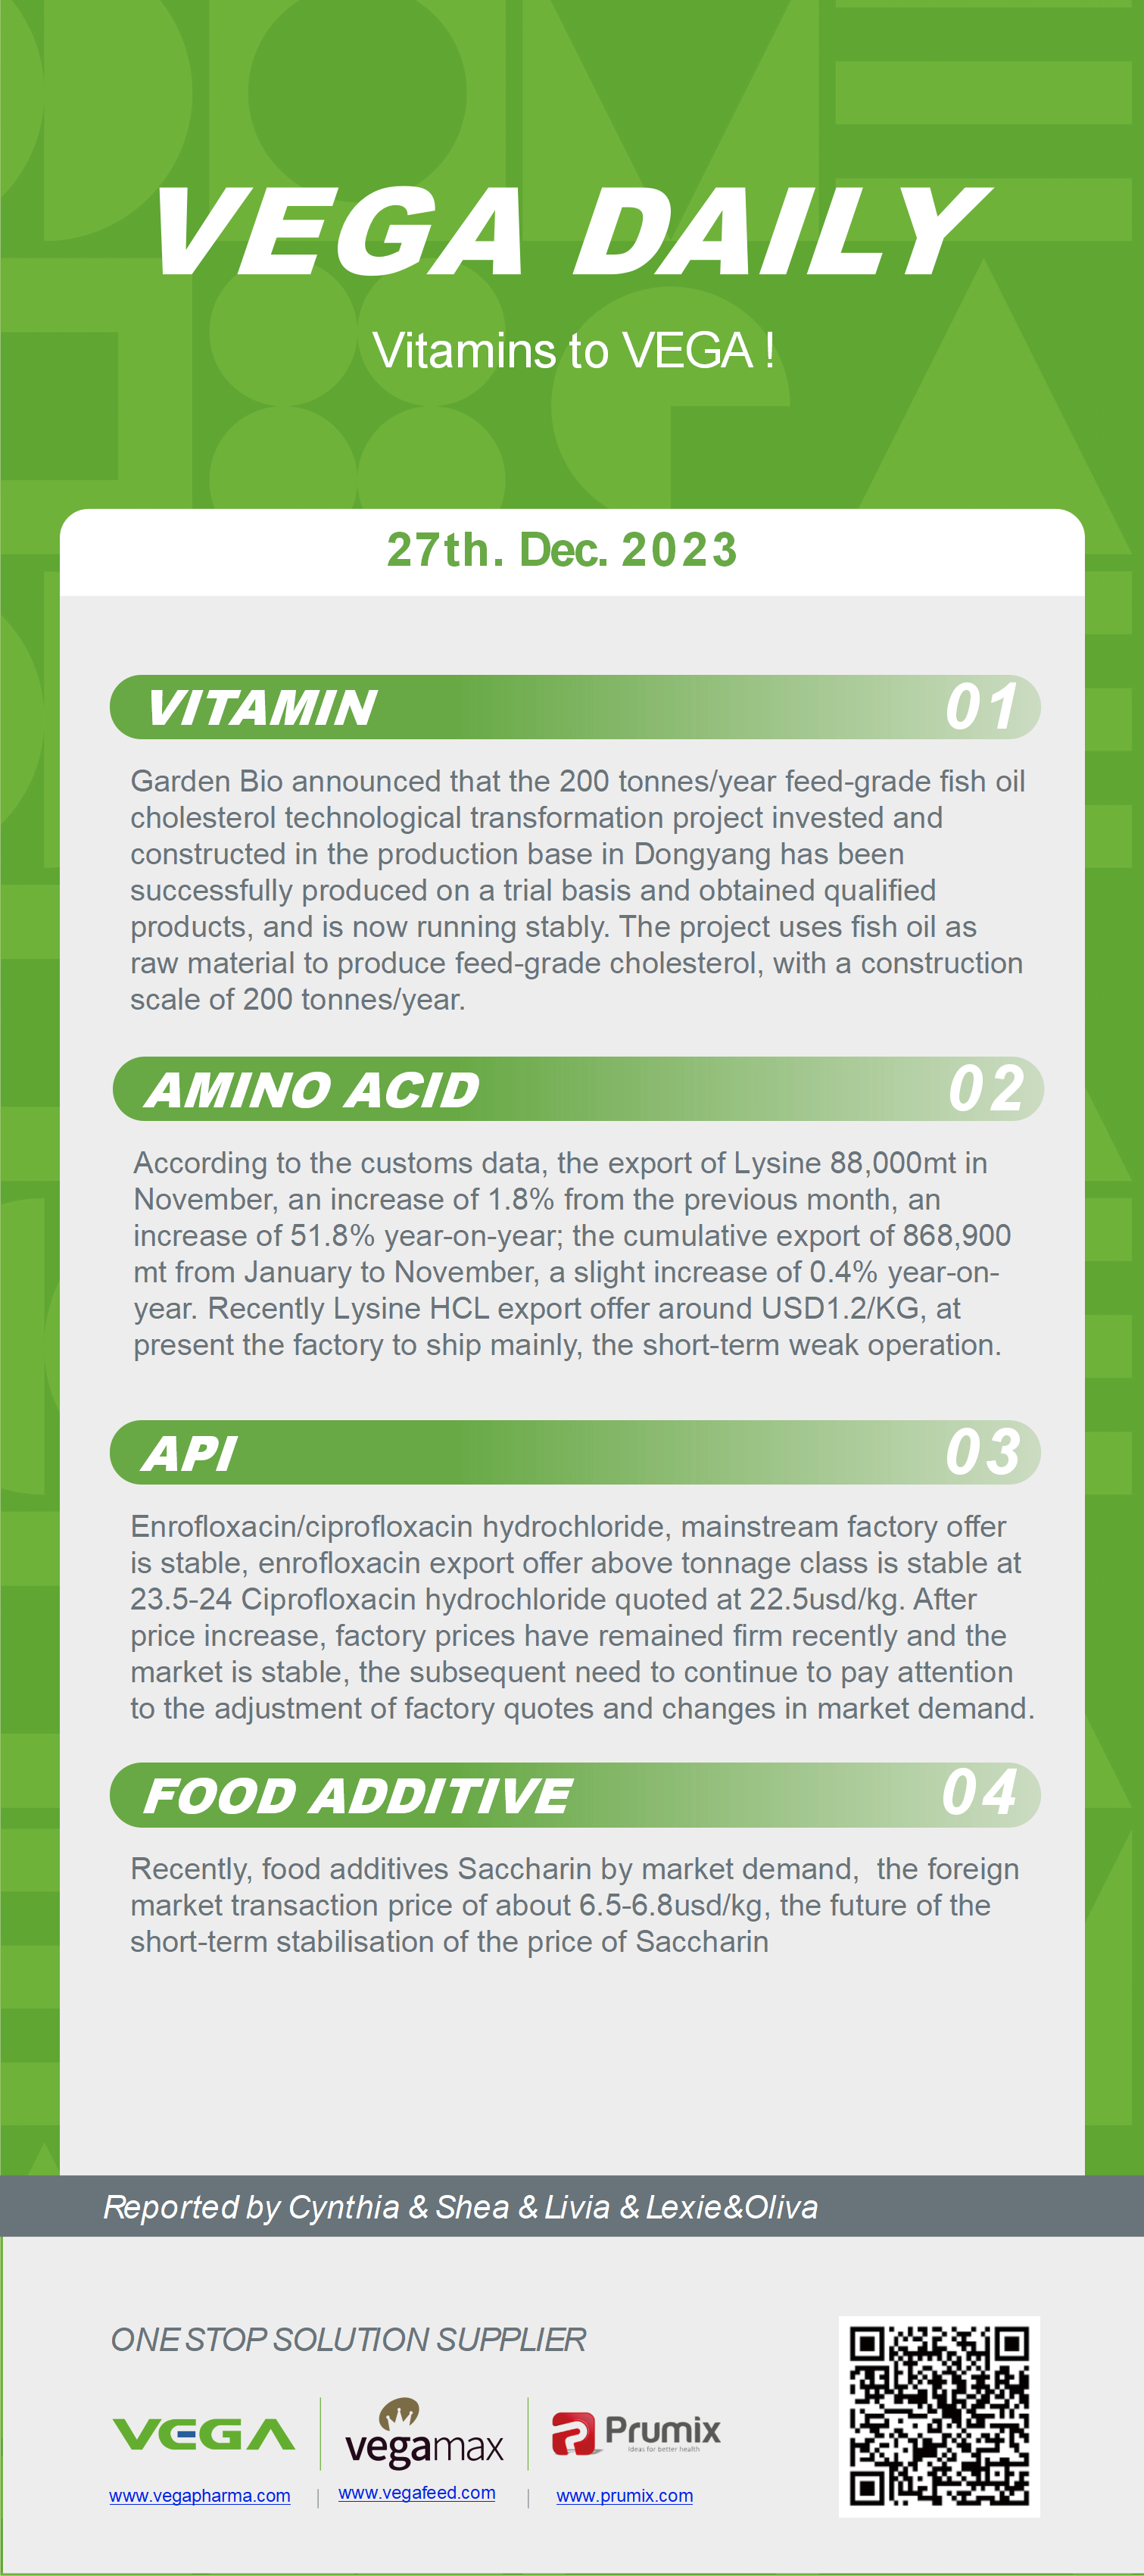 Vega Daily Dated on Dec 27th 2023 Vitamin Amino Acid APl Food Additives.png